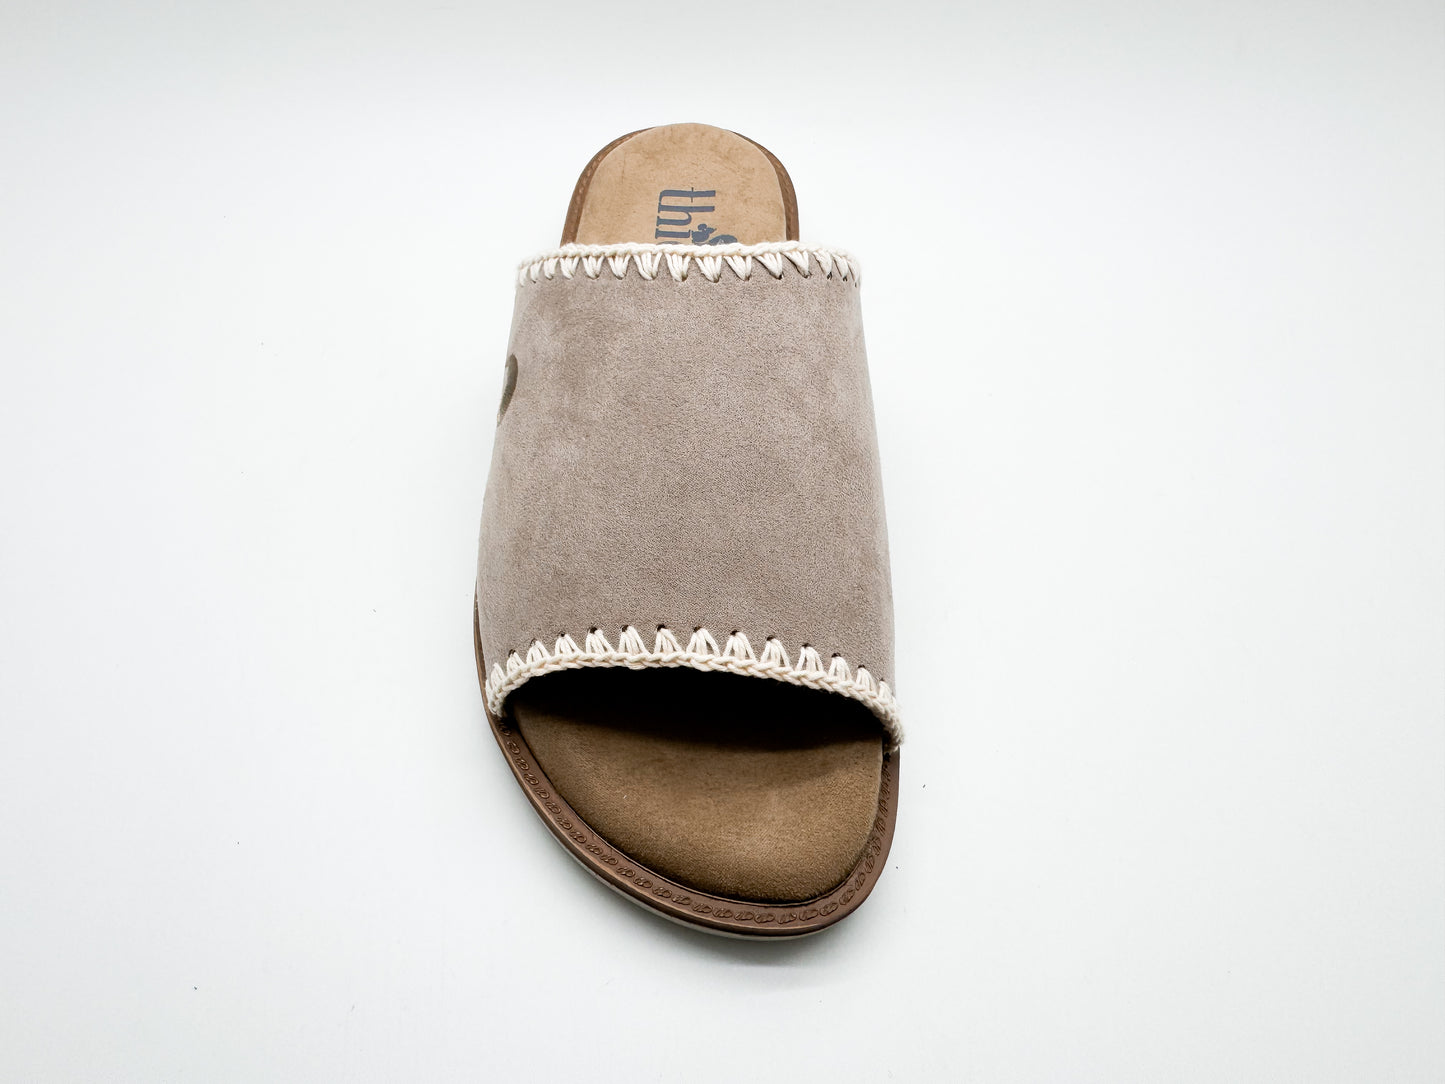 thies 1856 ® Rec Soft Woven Slide taupe (W/X)